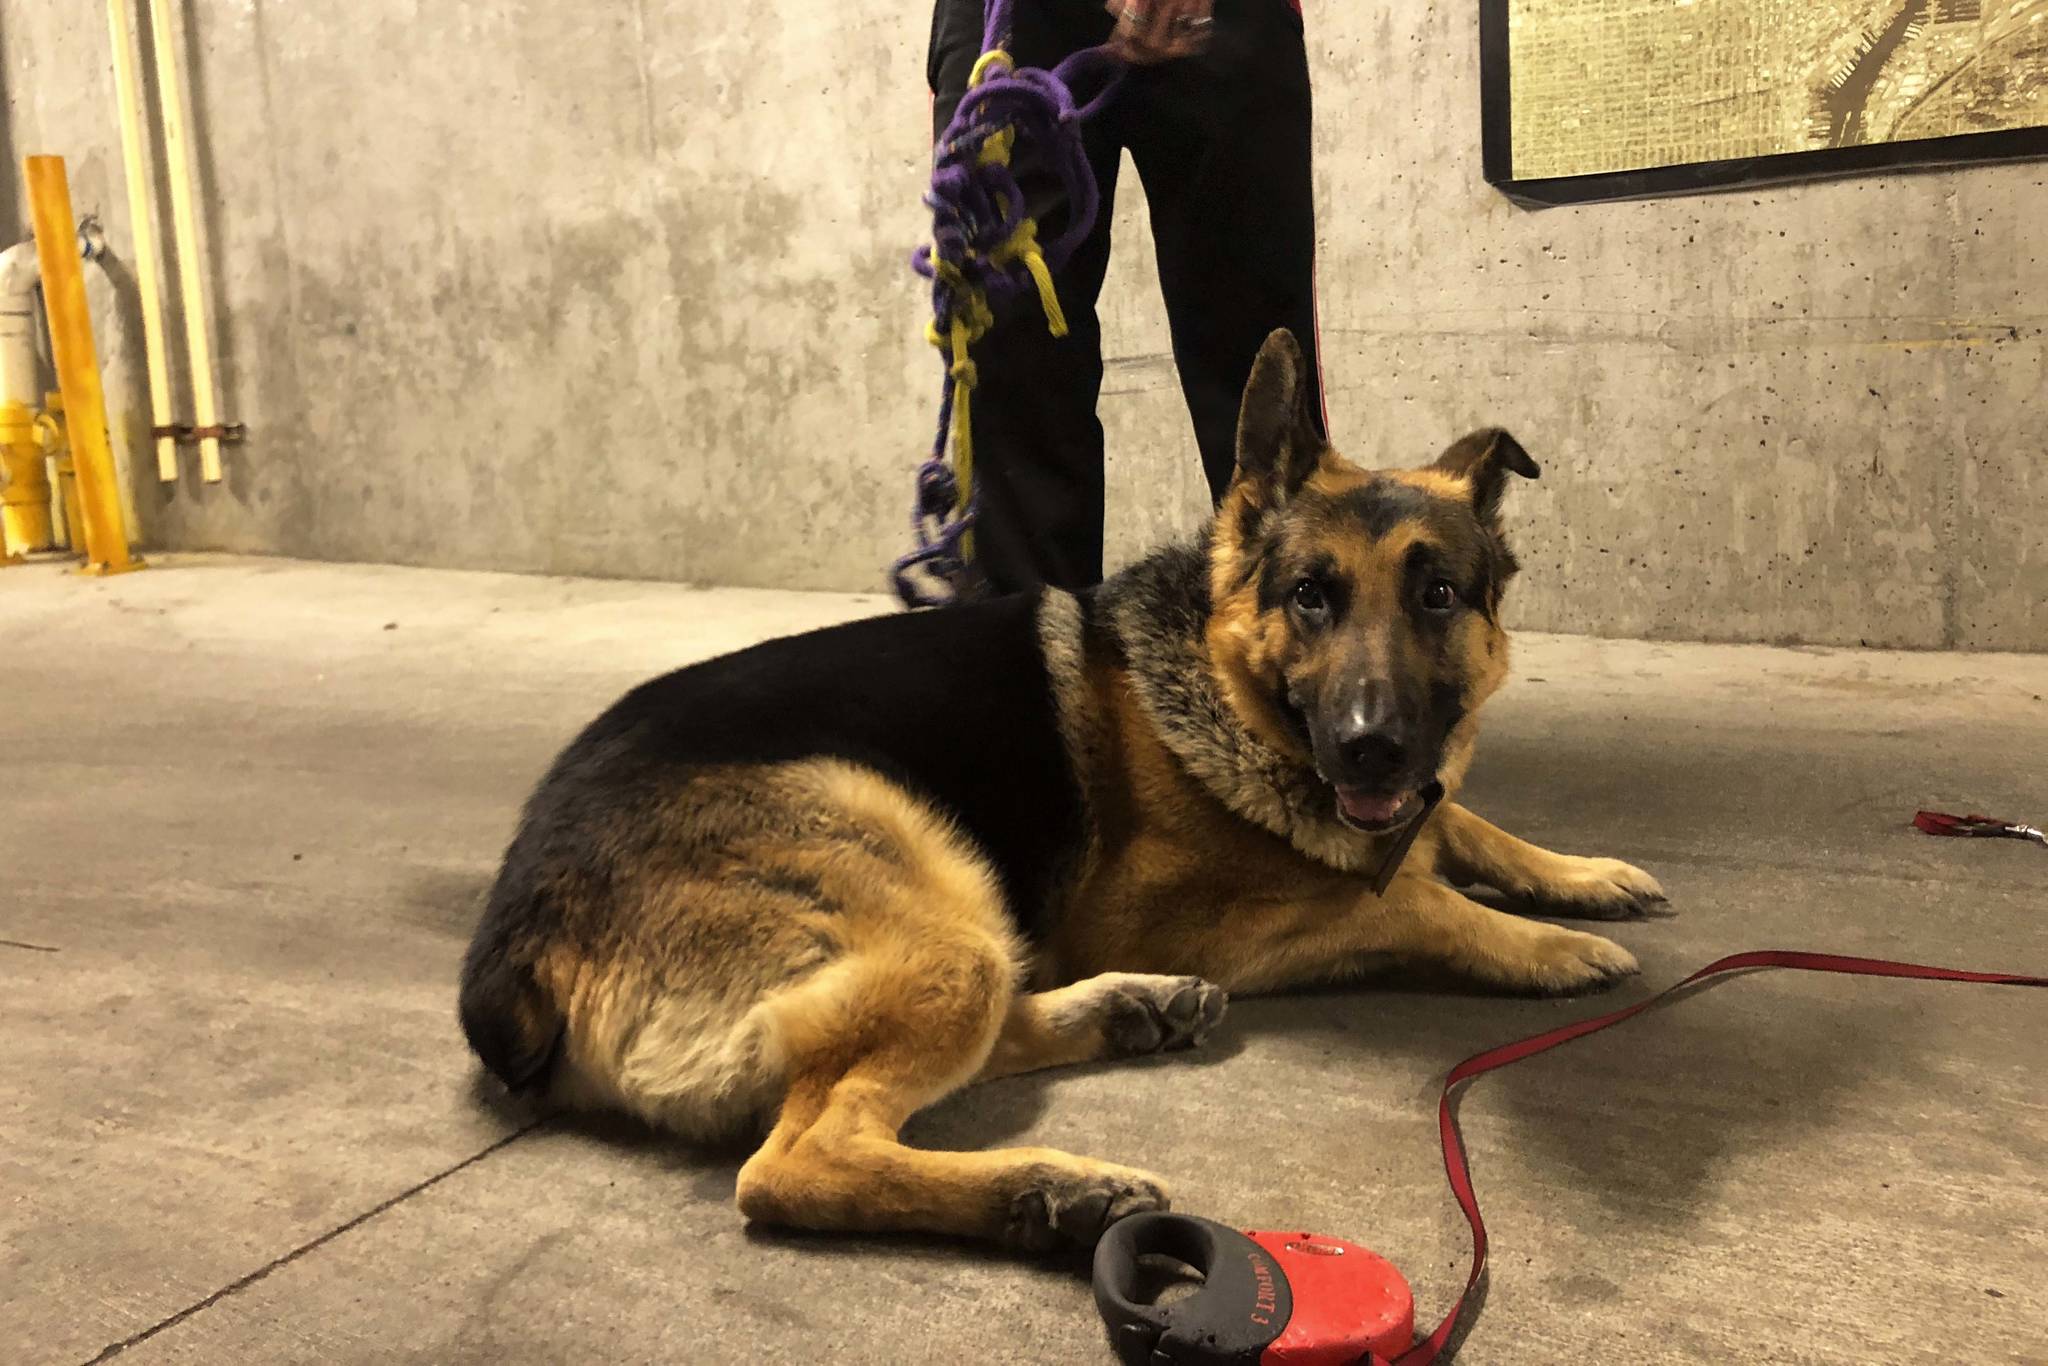 Kurt Niklas’s service dog, Leo, rests at Niklas’s feet in the Cate Apartments garage. Photo by Melissa Hellmann